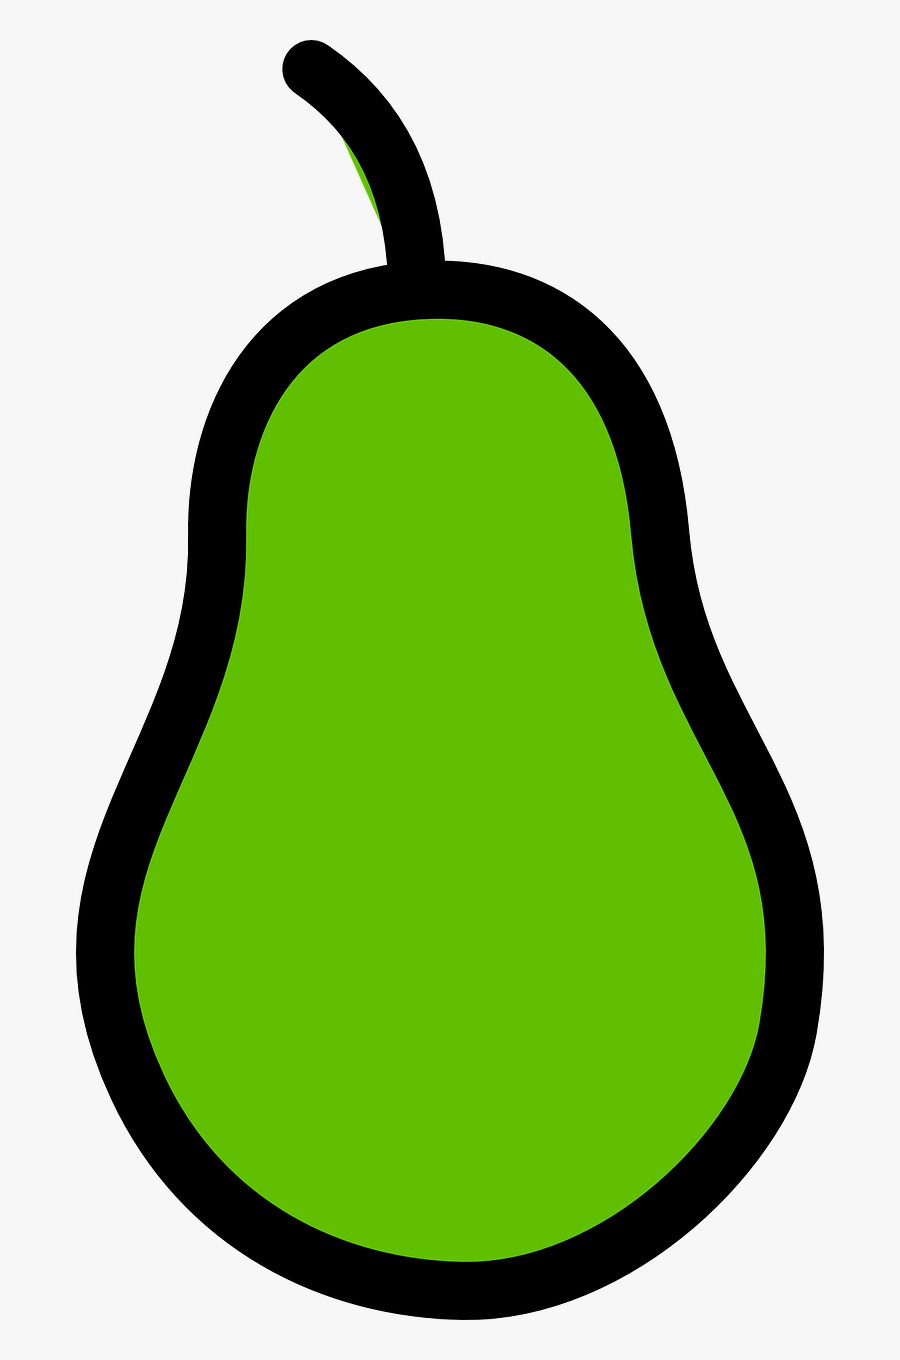 Pear,green Pear,fruit,bosc,free Vector Graphics,free, Transparent Clipart